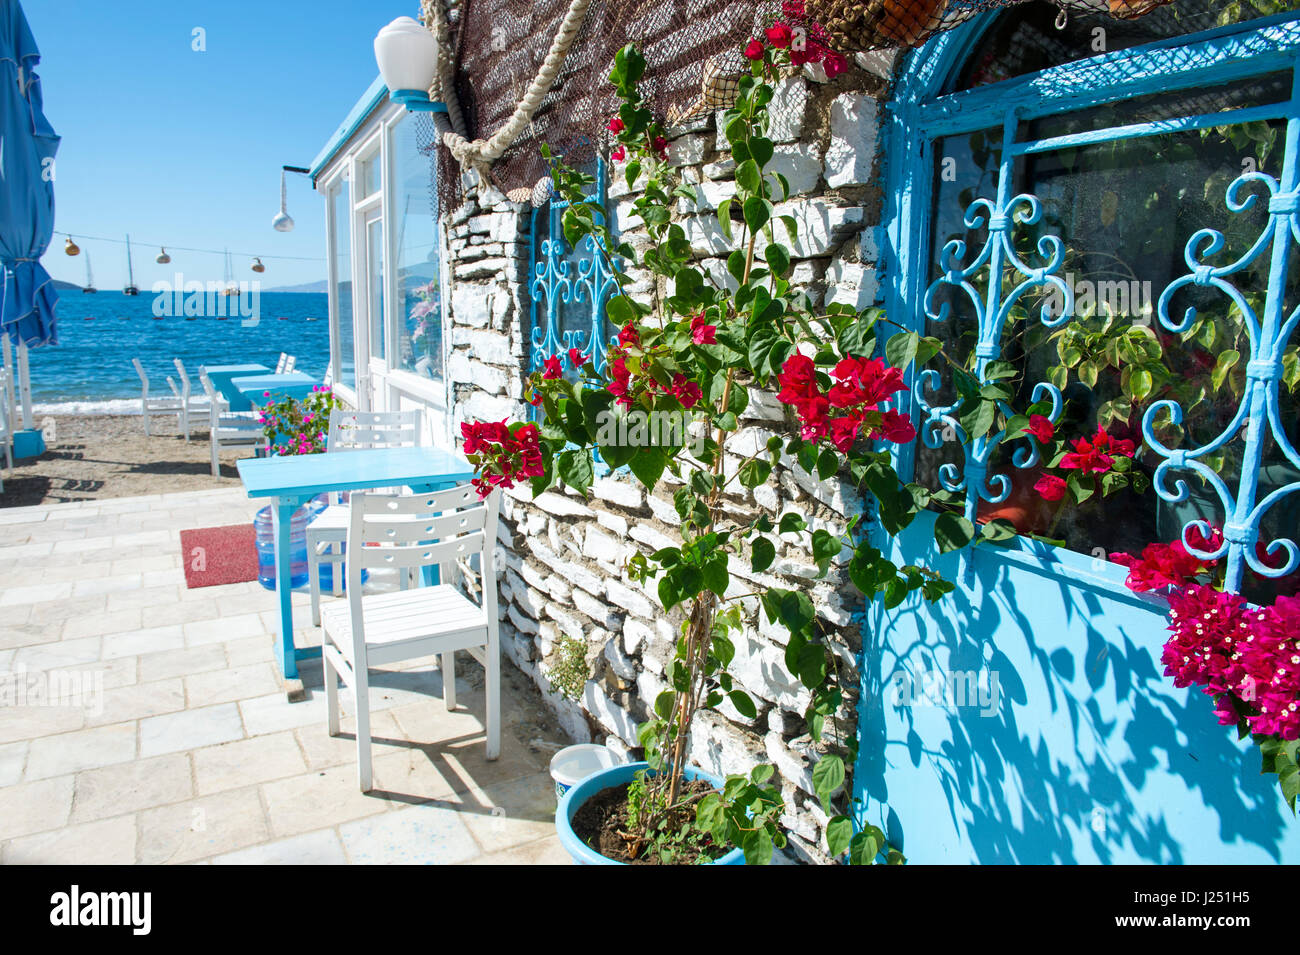 Bright morning view with classic Mediterranean colors and flowers in Bodrum, Turkey Stock Photo